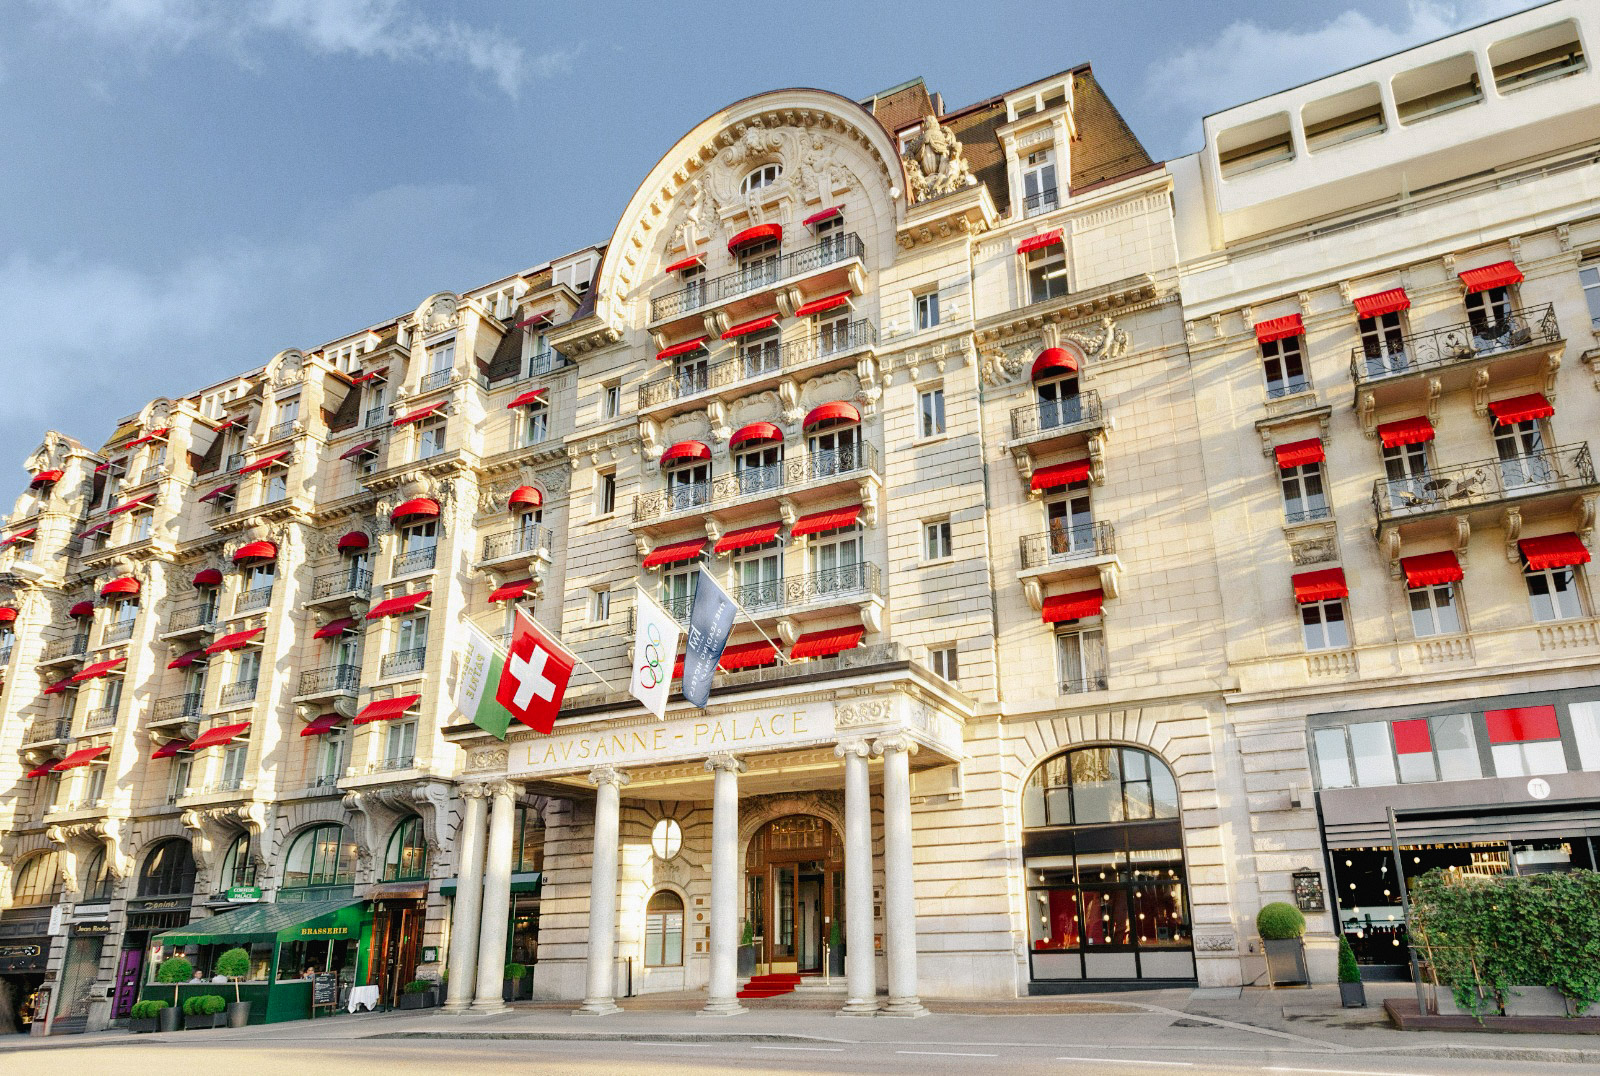 Lausanne Palace Hotel External View Front